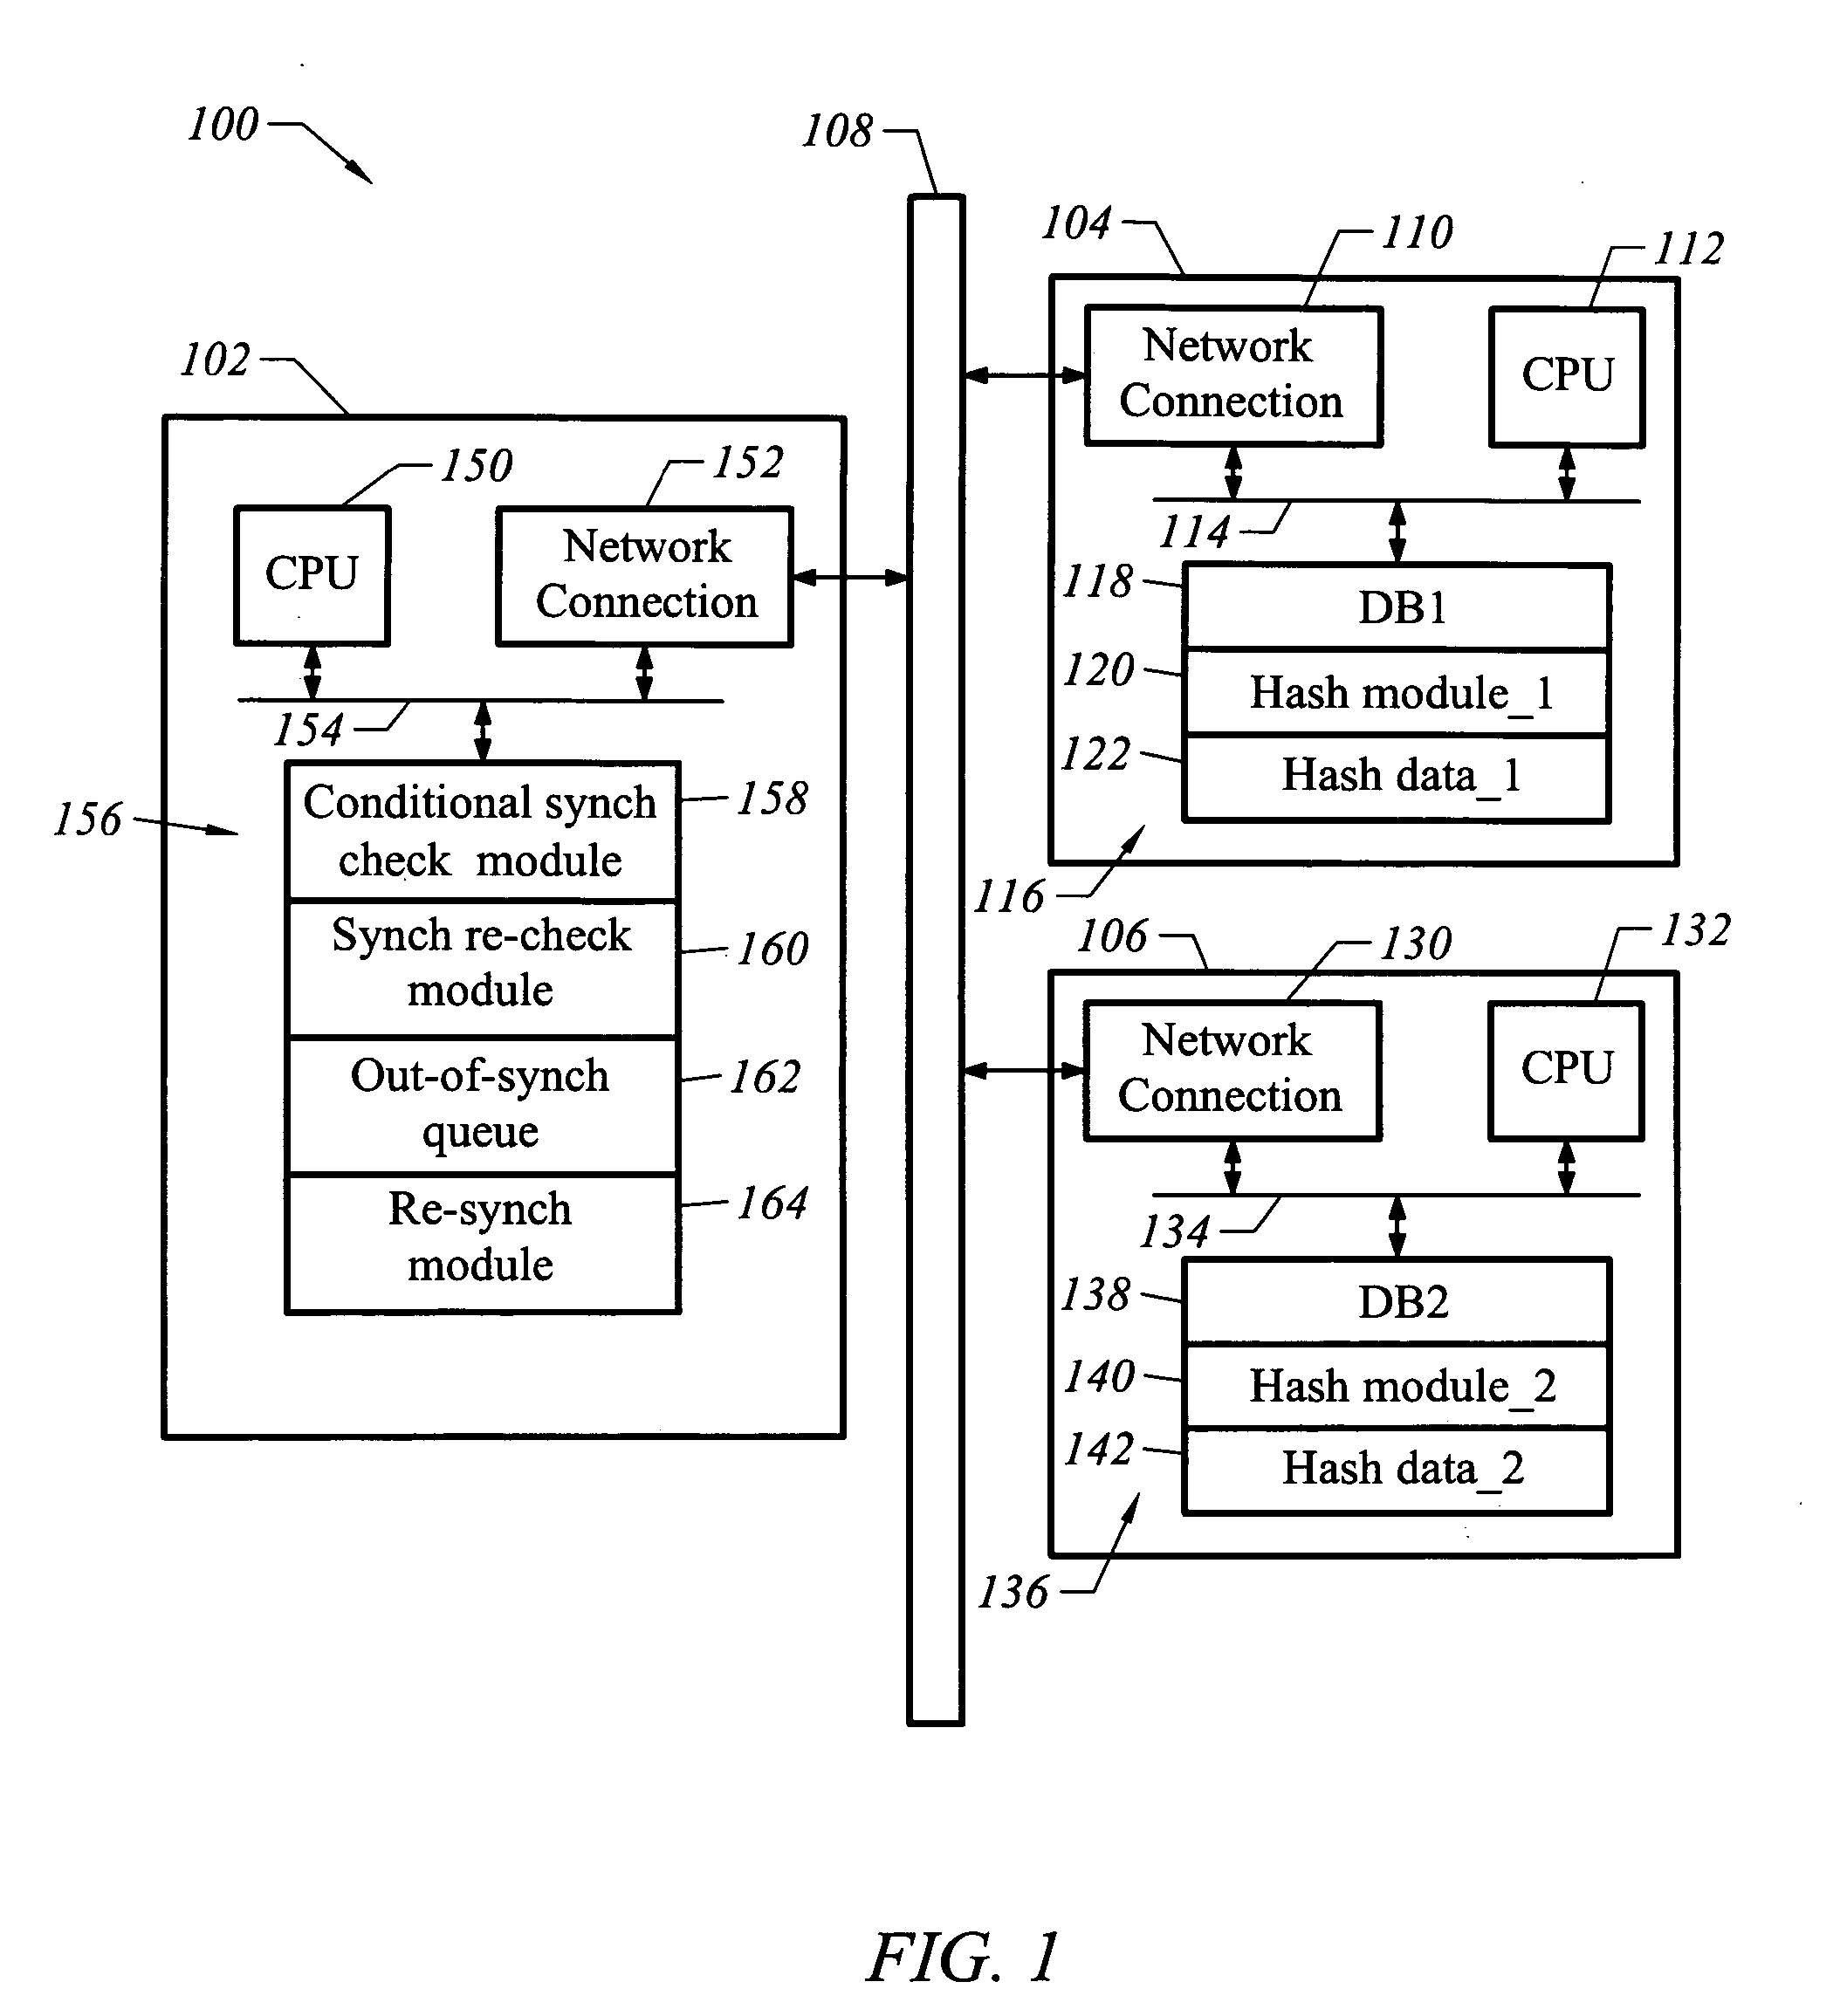 Apparatus and method for identifying asynchronous data in redundant data stores and for re-synchronizing same